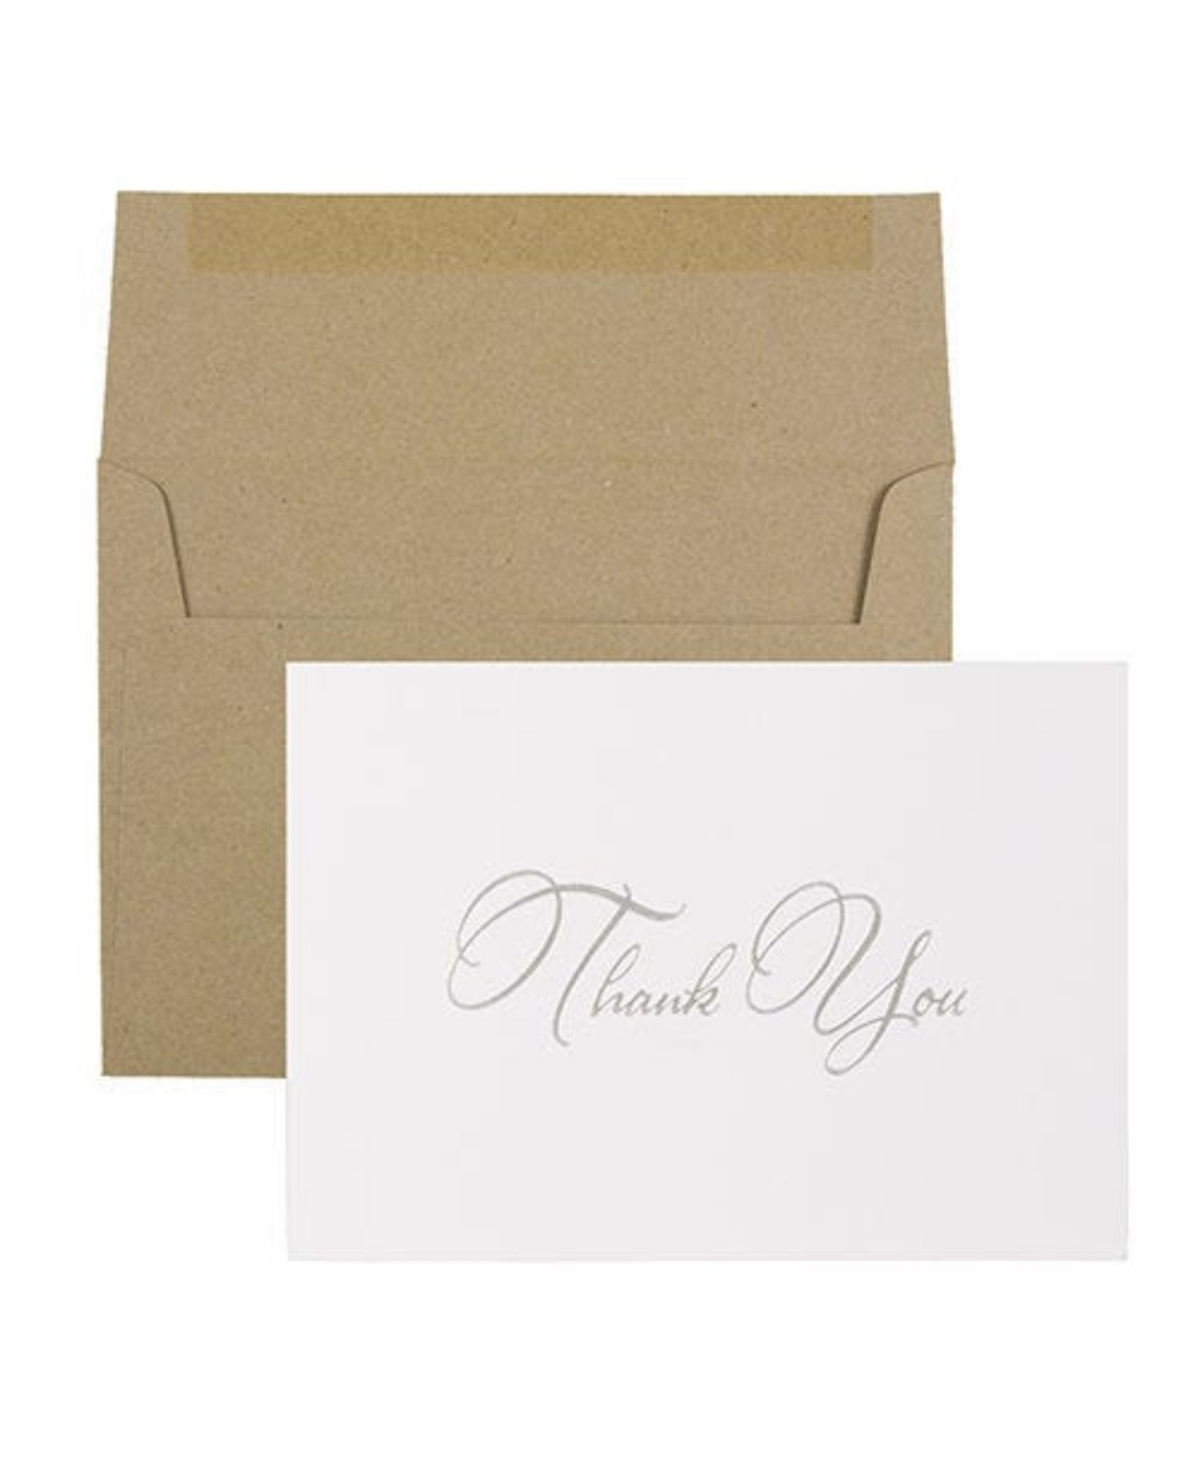 Thank You Card Sets - Silver-Tone Script Cards with Kraft Envelopes - 25 Cards and Envelopes - Silver Foil